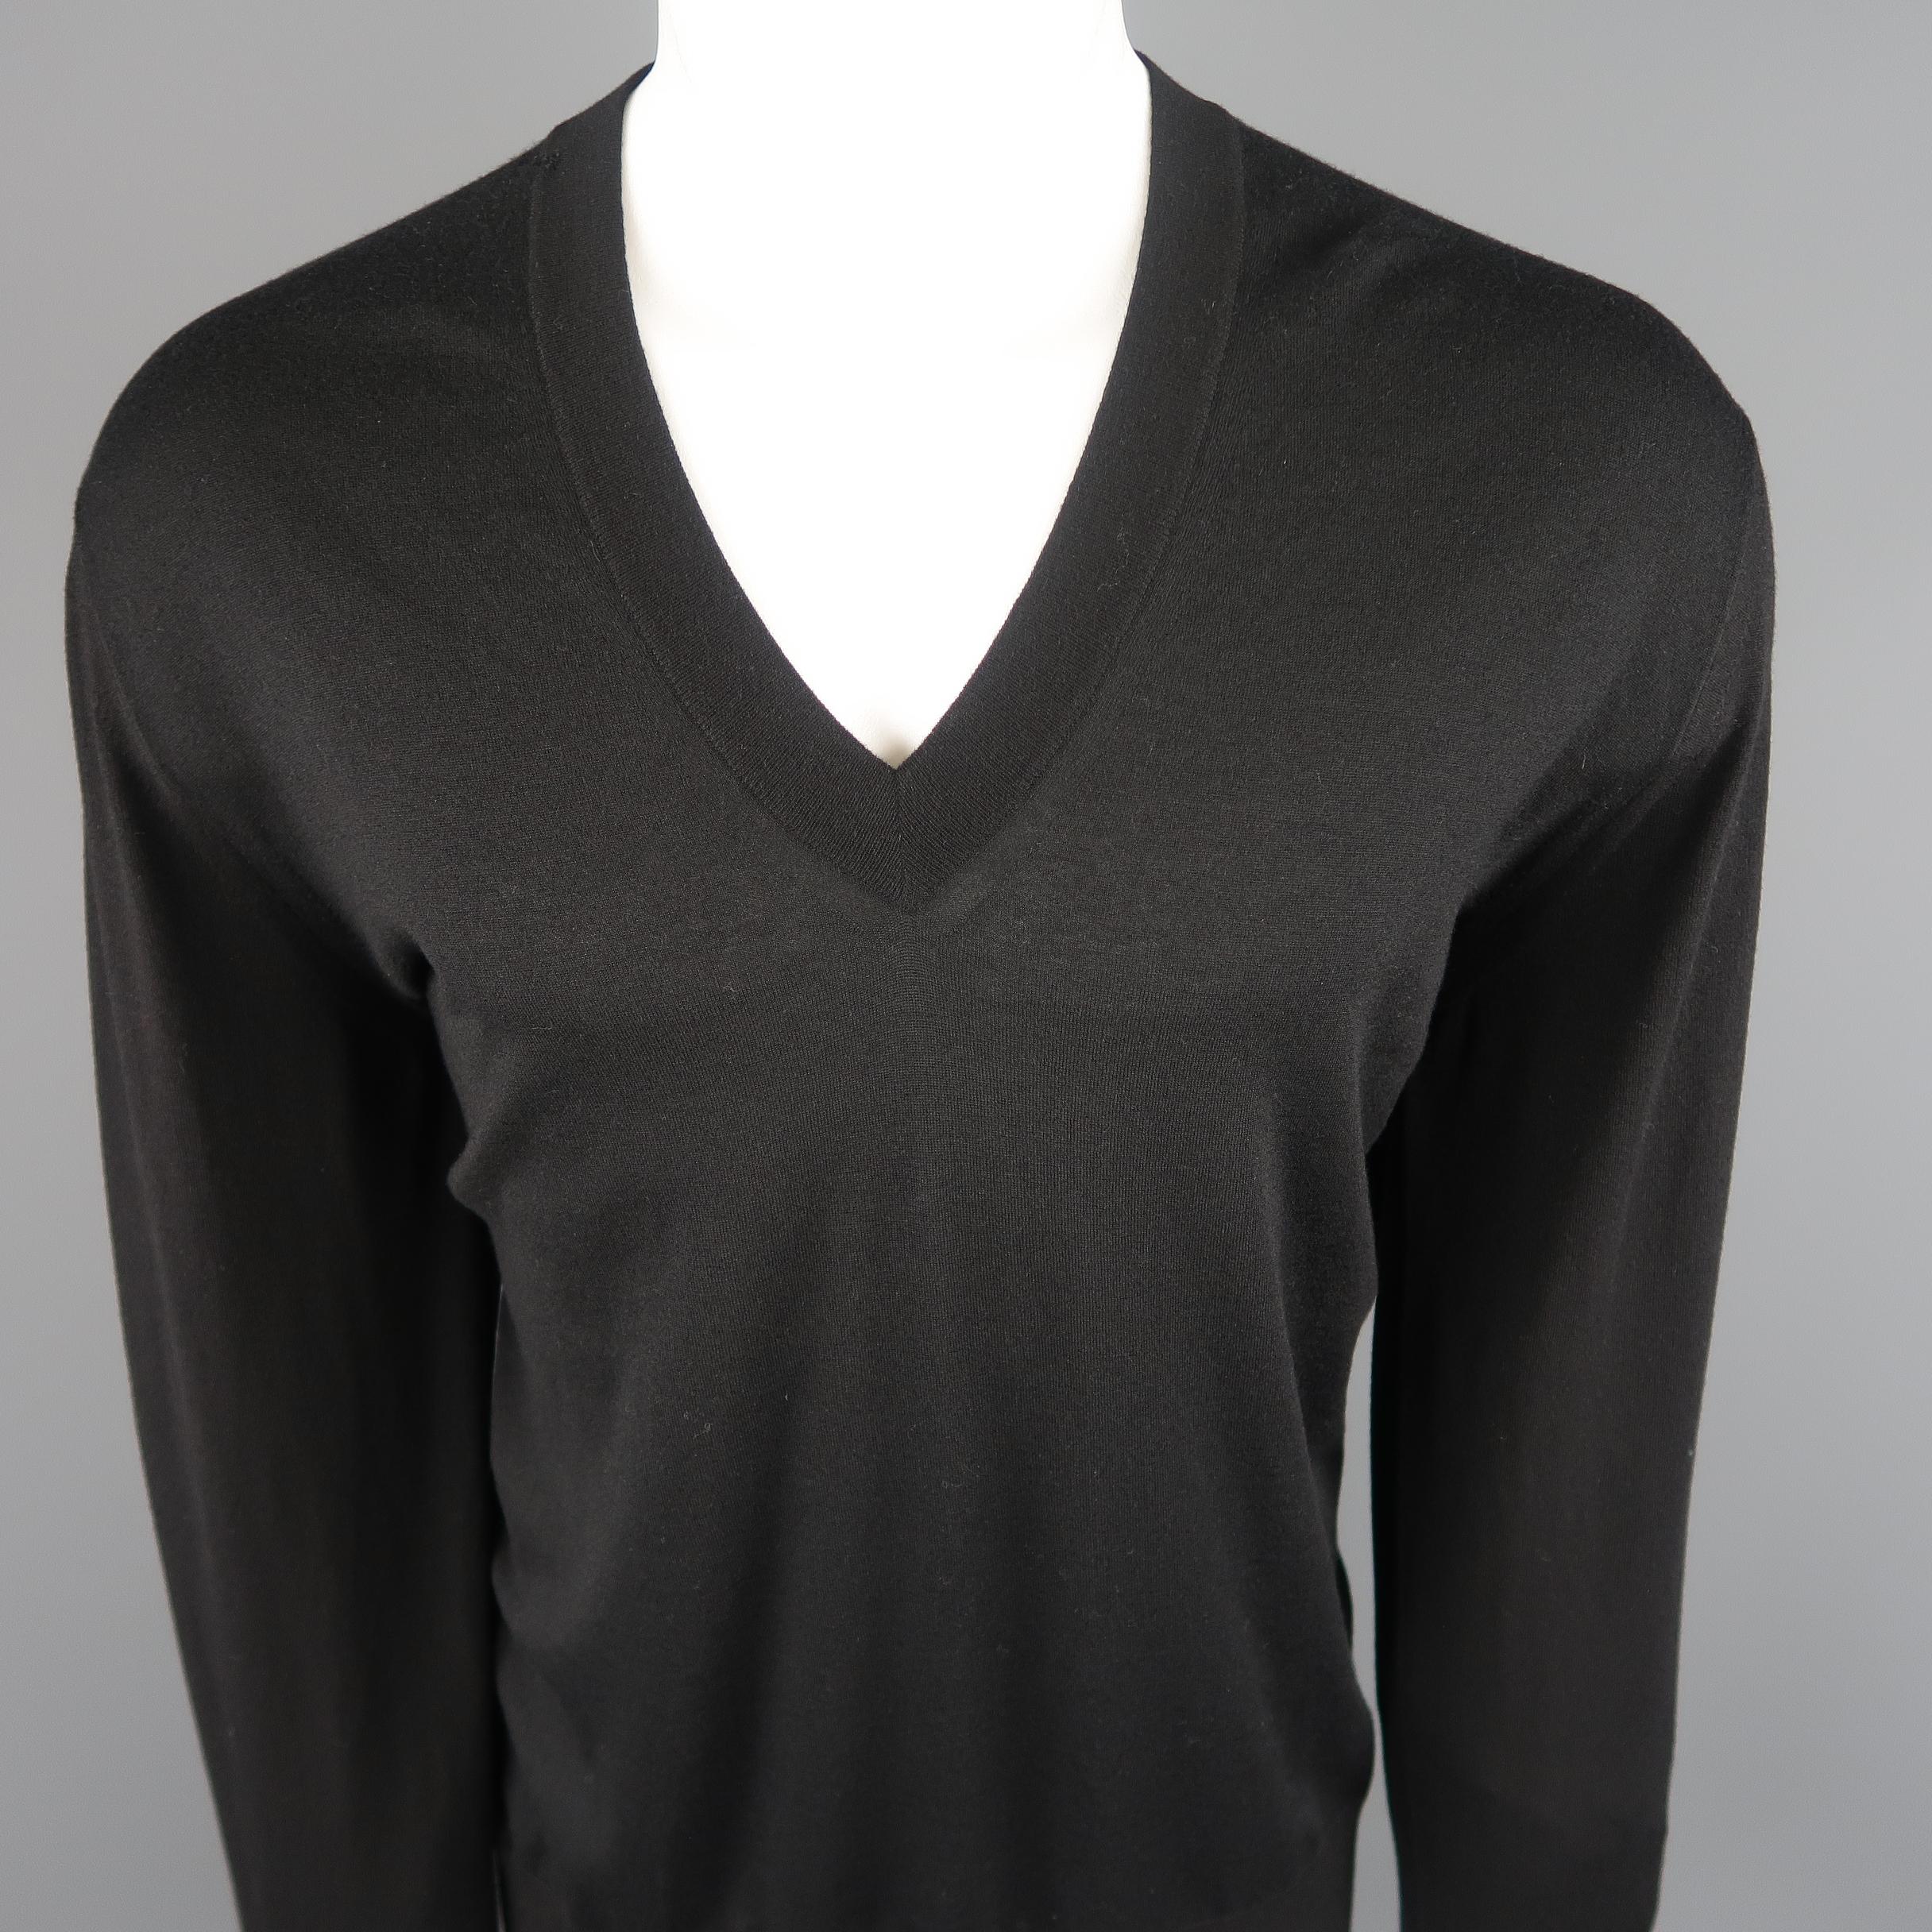 Dolce & Gabbana Size XL pullover come in Cashmere in a black tone knit, with a V-neck, and ribbed cuff and waistband. Made in Italy.
 
FAIR  Pre-Owned Condition.
Marked: XL
 
Measurements:
 
Shoulder: 20 in.
Chest: 23.5 in.
Sleeve: 29.5 in.
Length: